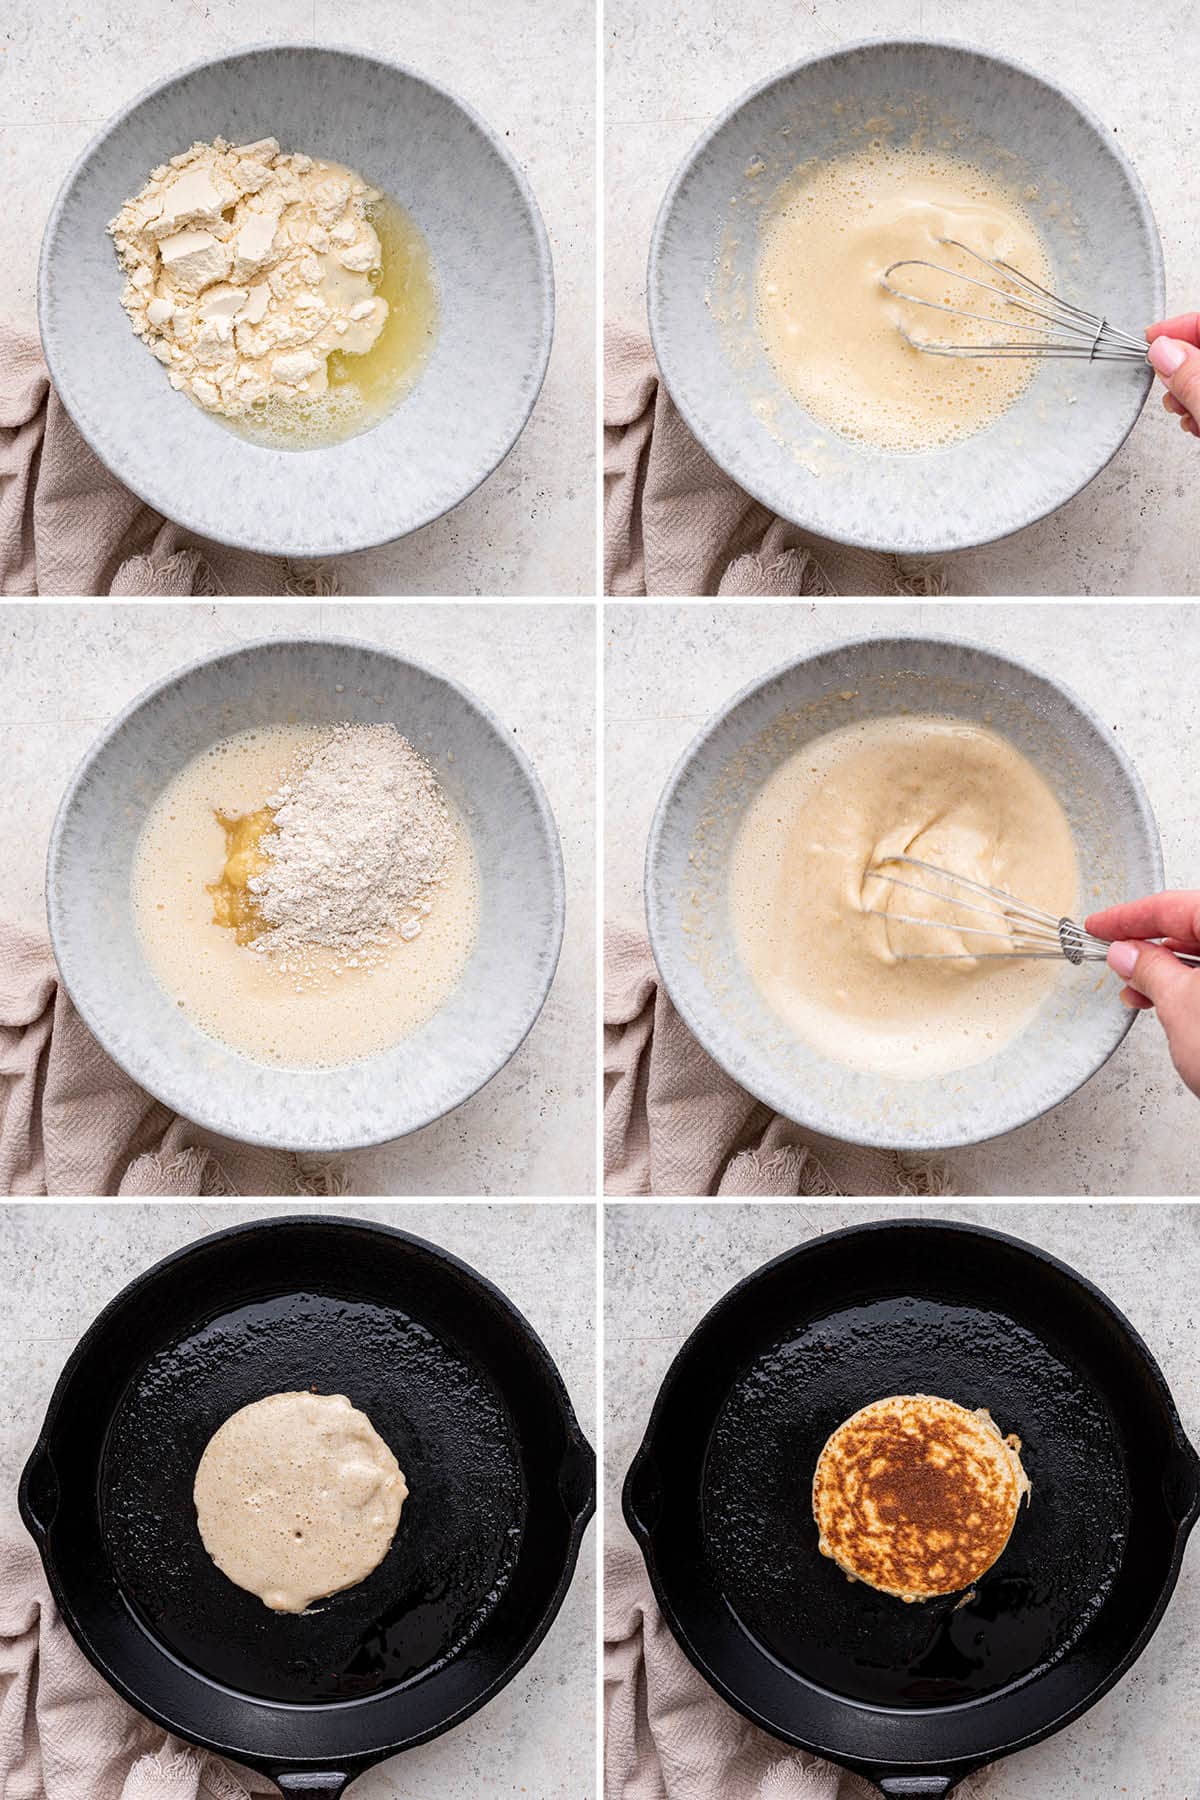 Six photos showing the steps to make Protein Pancakes: whisking the batter and then cooking pancake in a skillet.